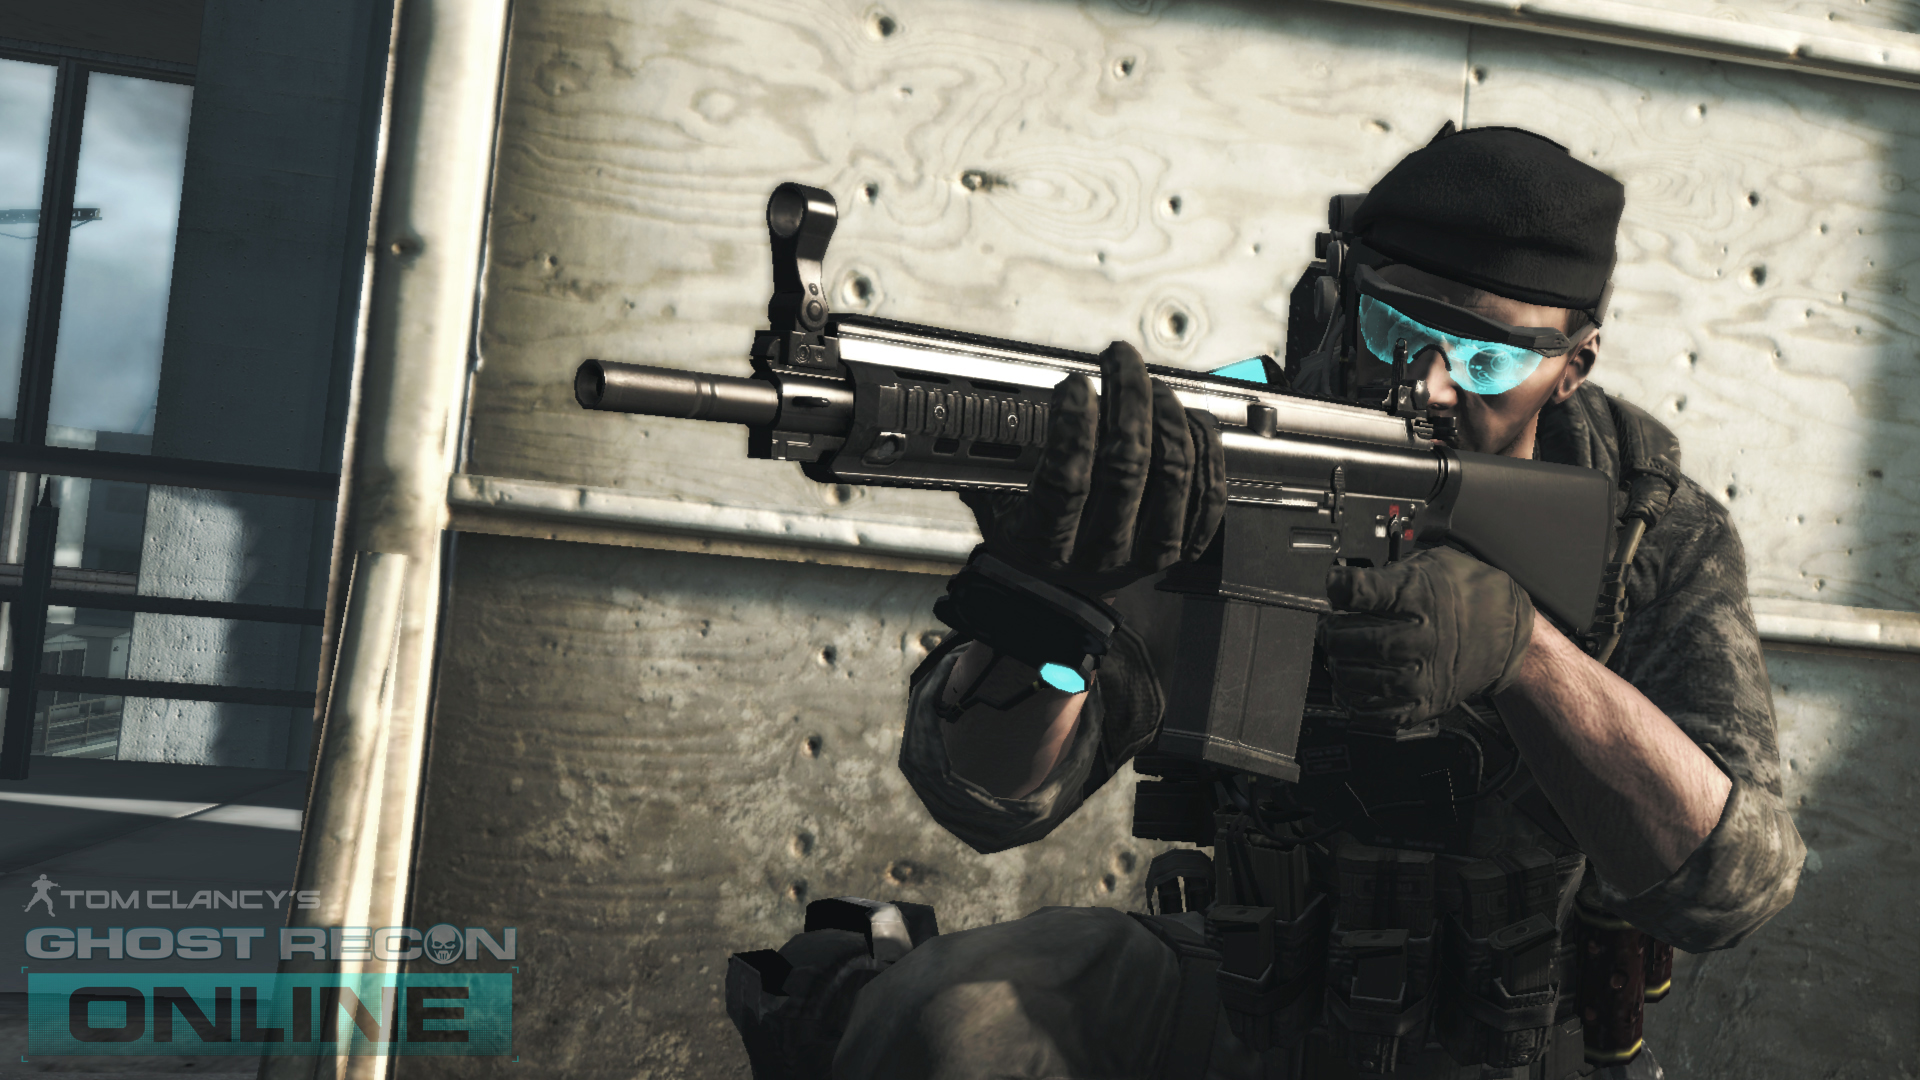 Ghost Recon, Ghost Recon Phantoms, Shades, FPS, Game, Shooter, Rifle, Soldier